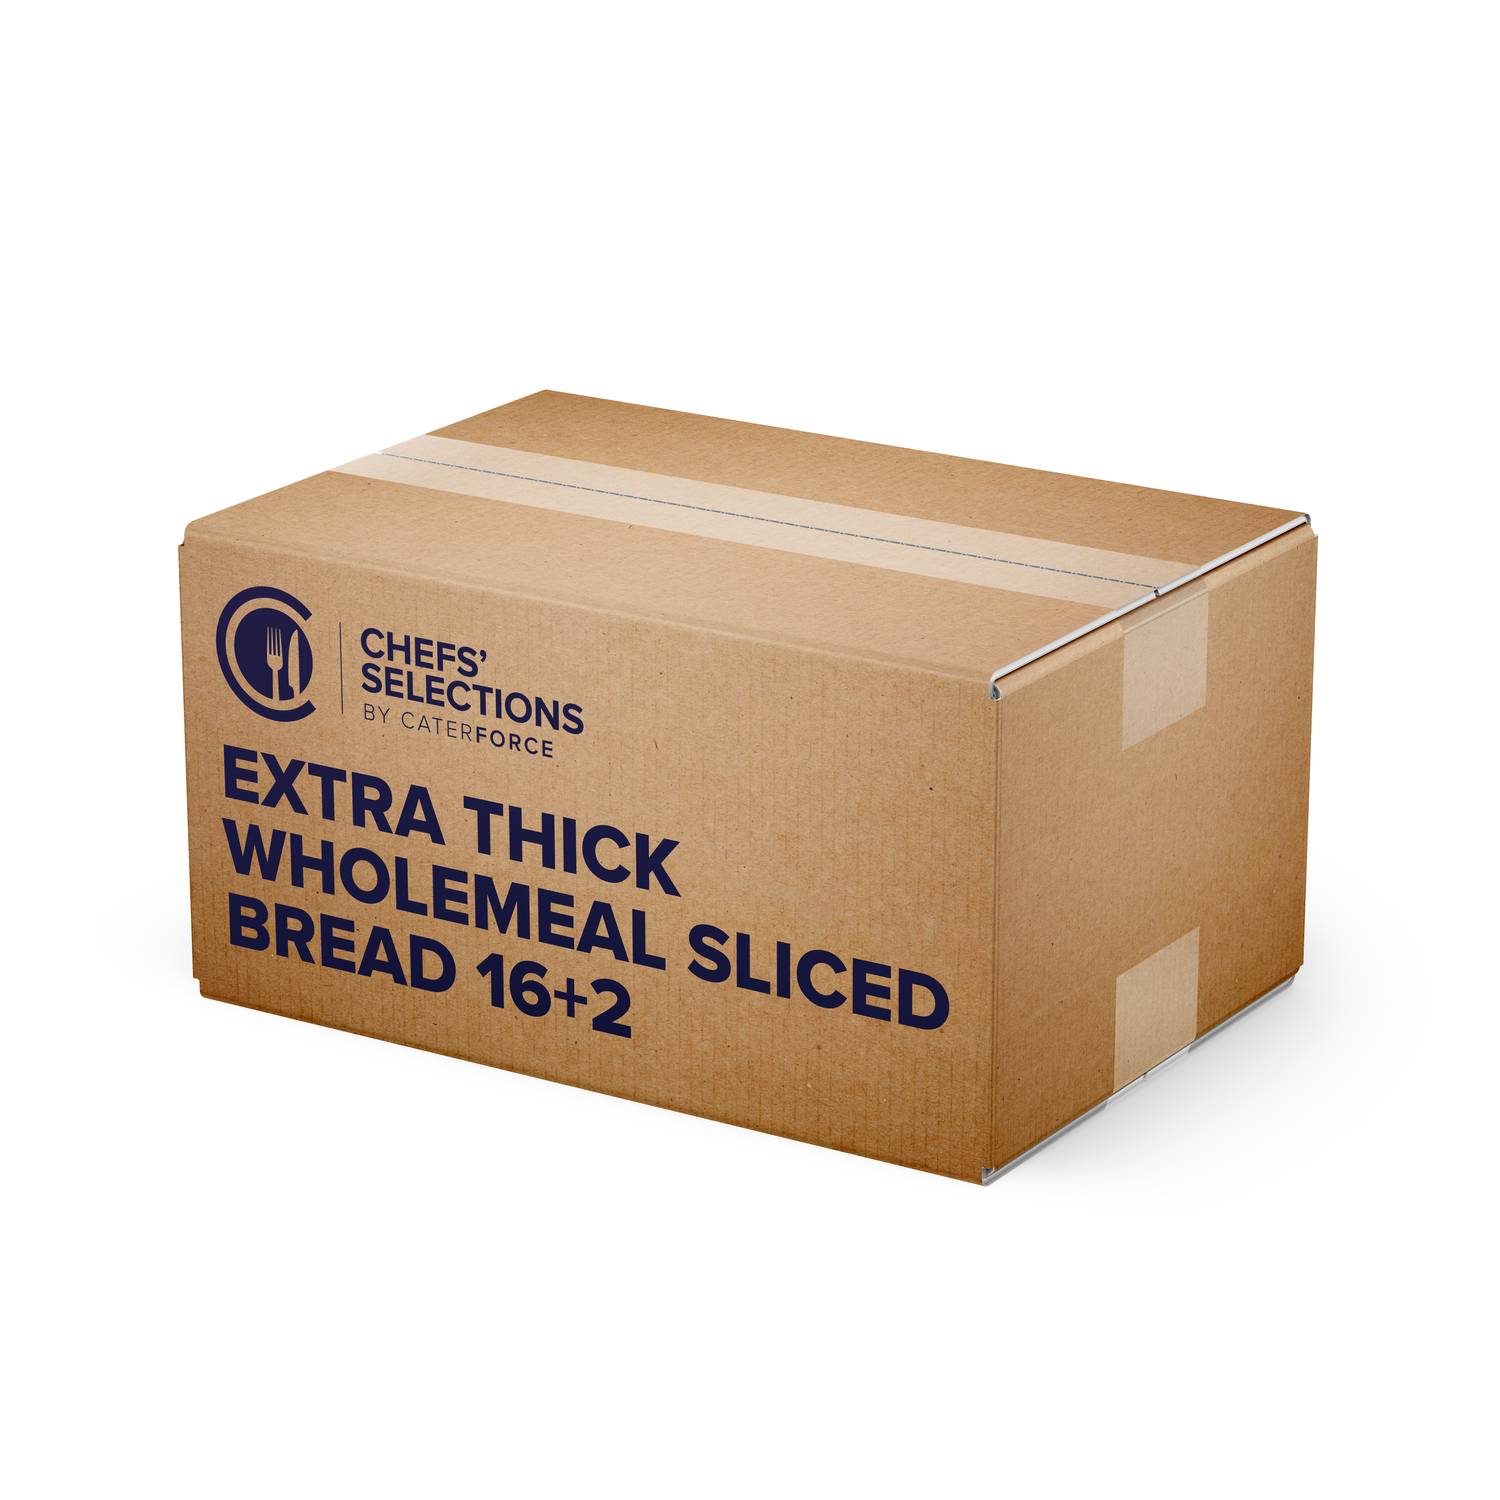 Chefs’ Selections Extra Thick Sandwich Wholemeal Bread (16+2)